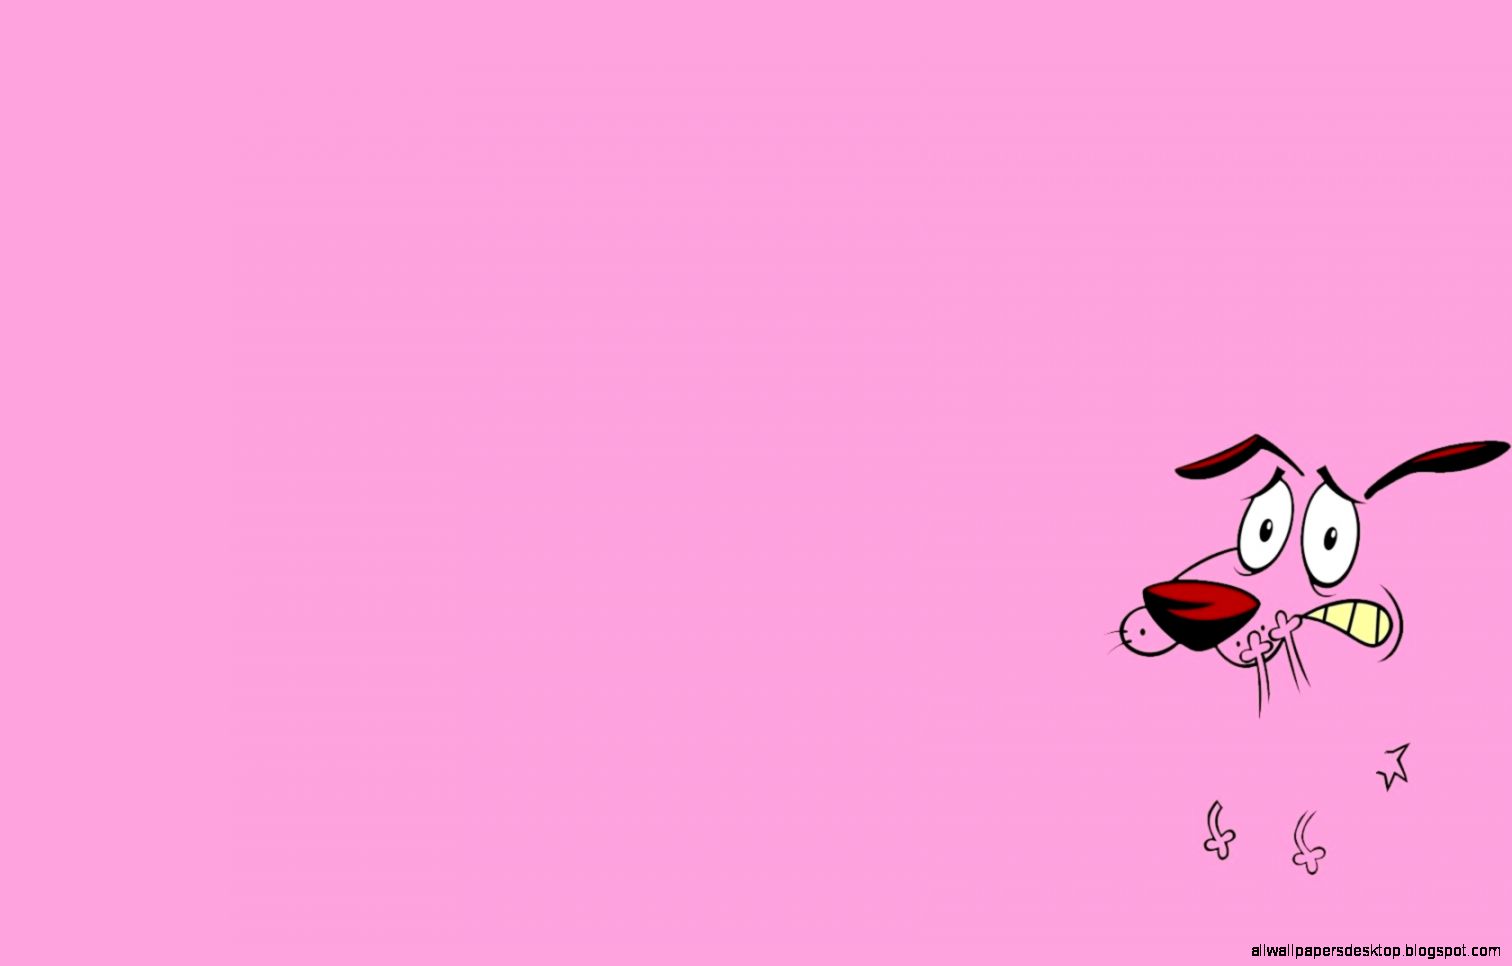 Courage the cowardly dog cimputer quotes Cartoon courage cowardly dog HD wallpaper all wallpaper desktop